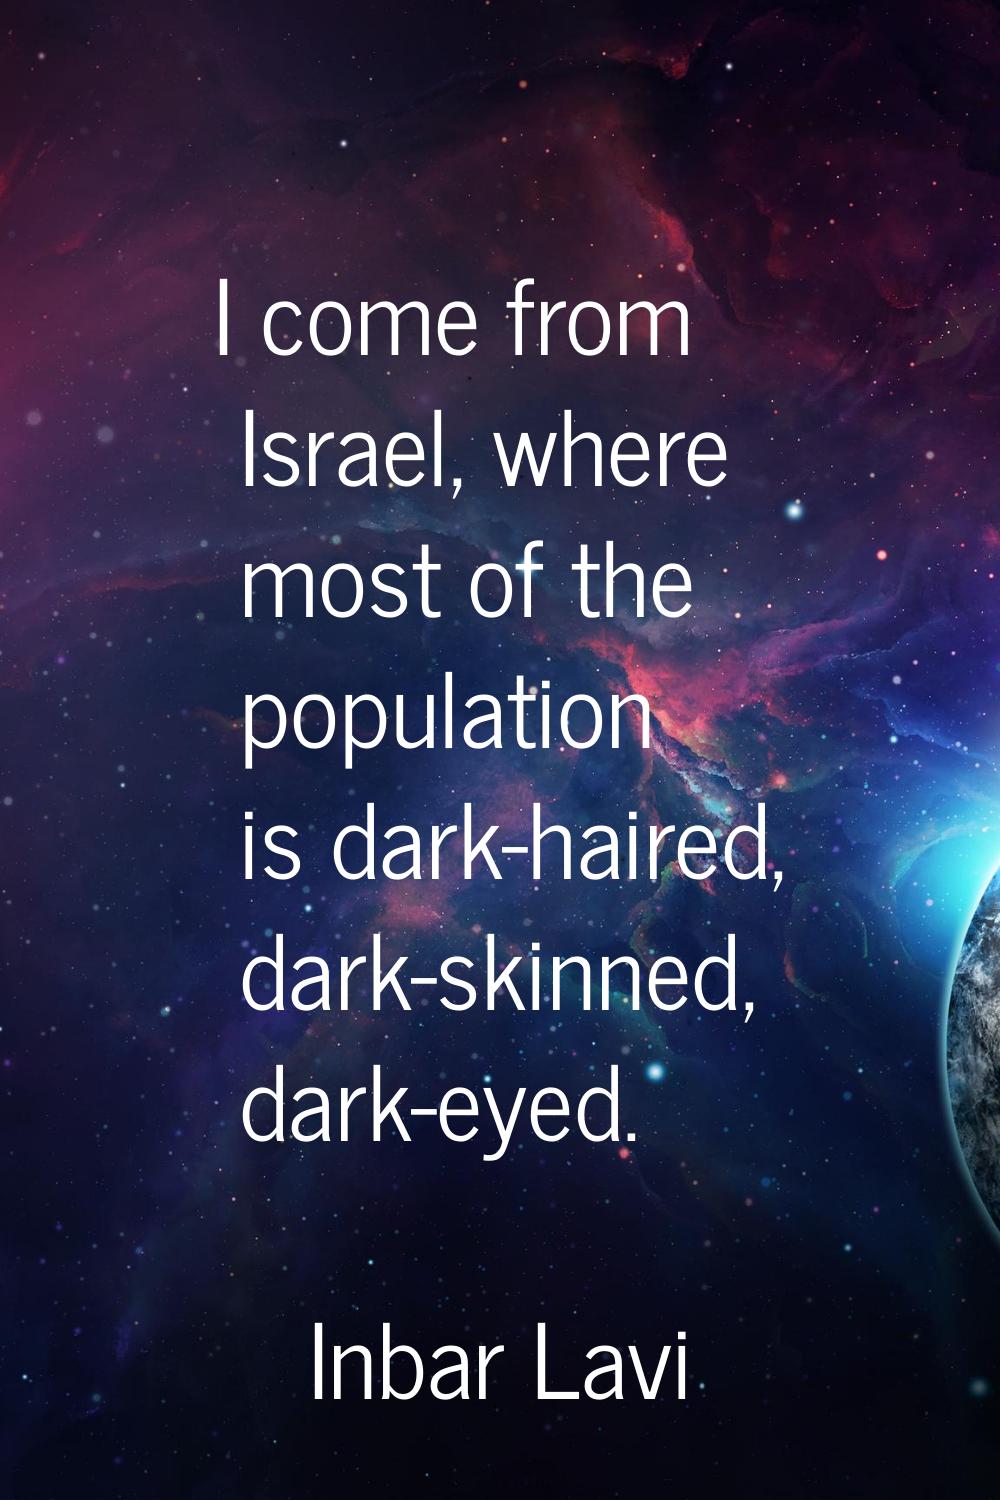 I come from Israel, where most of the population is dark-haired, dark-skinned, dark-eyed.